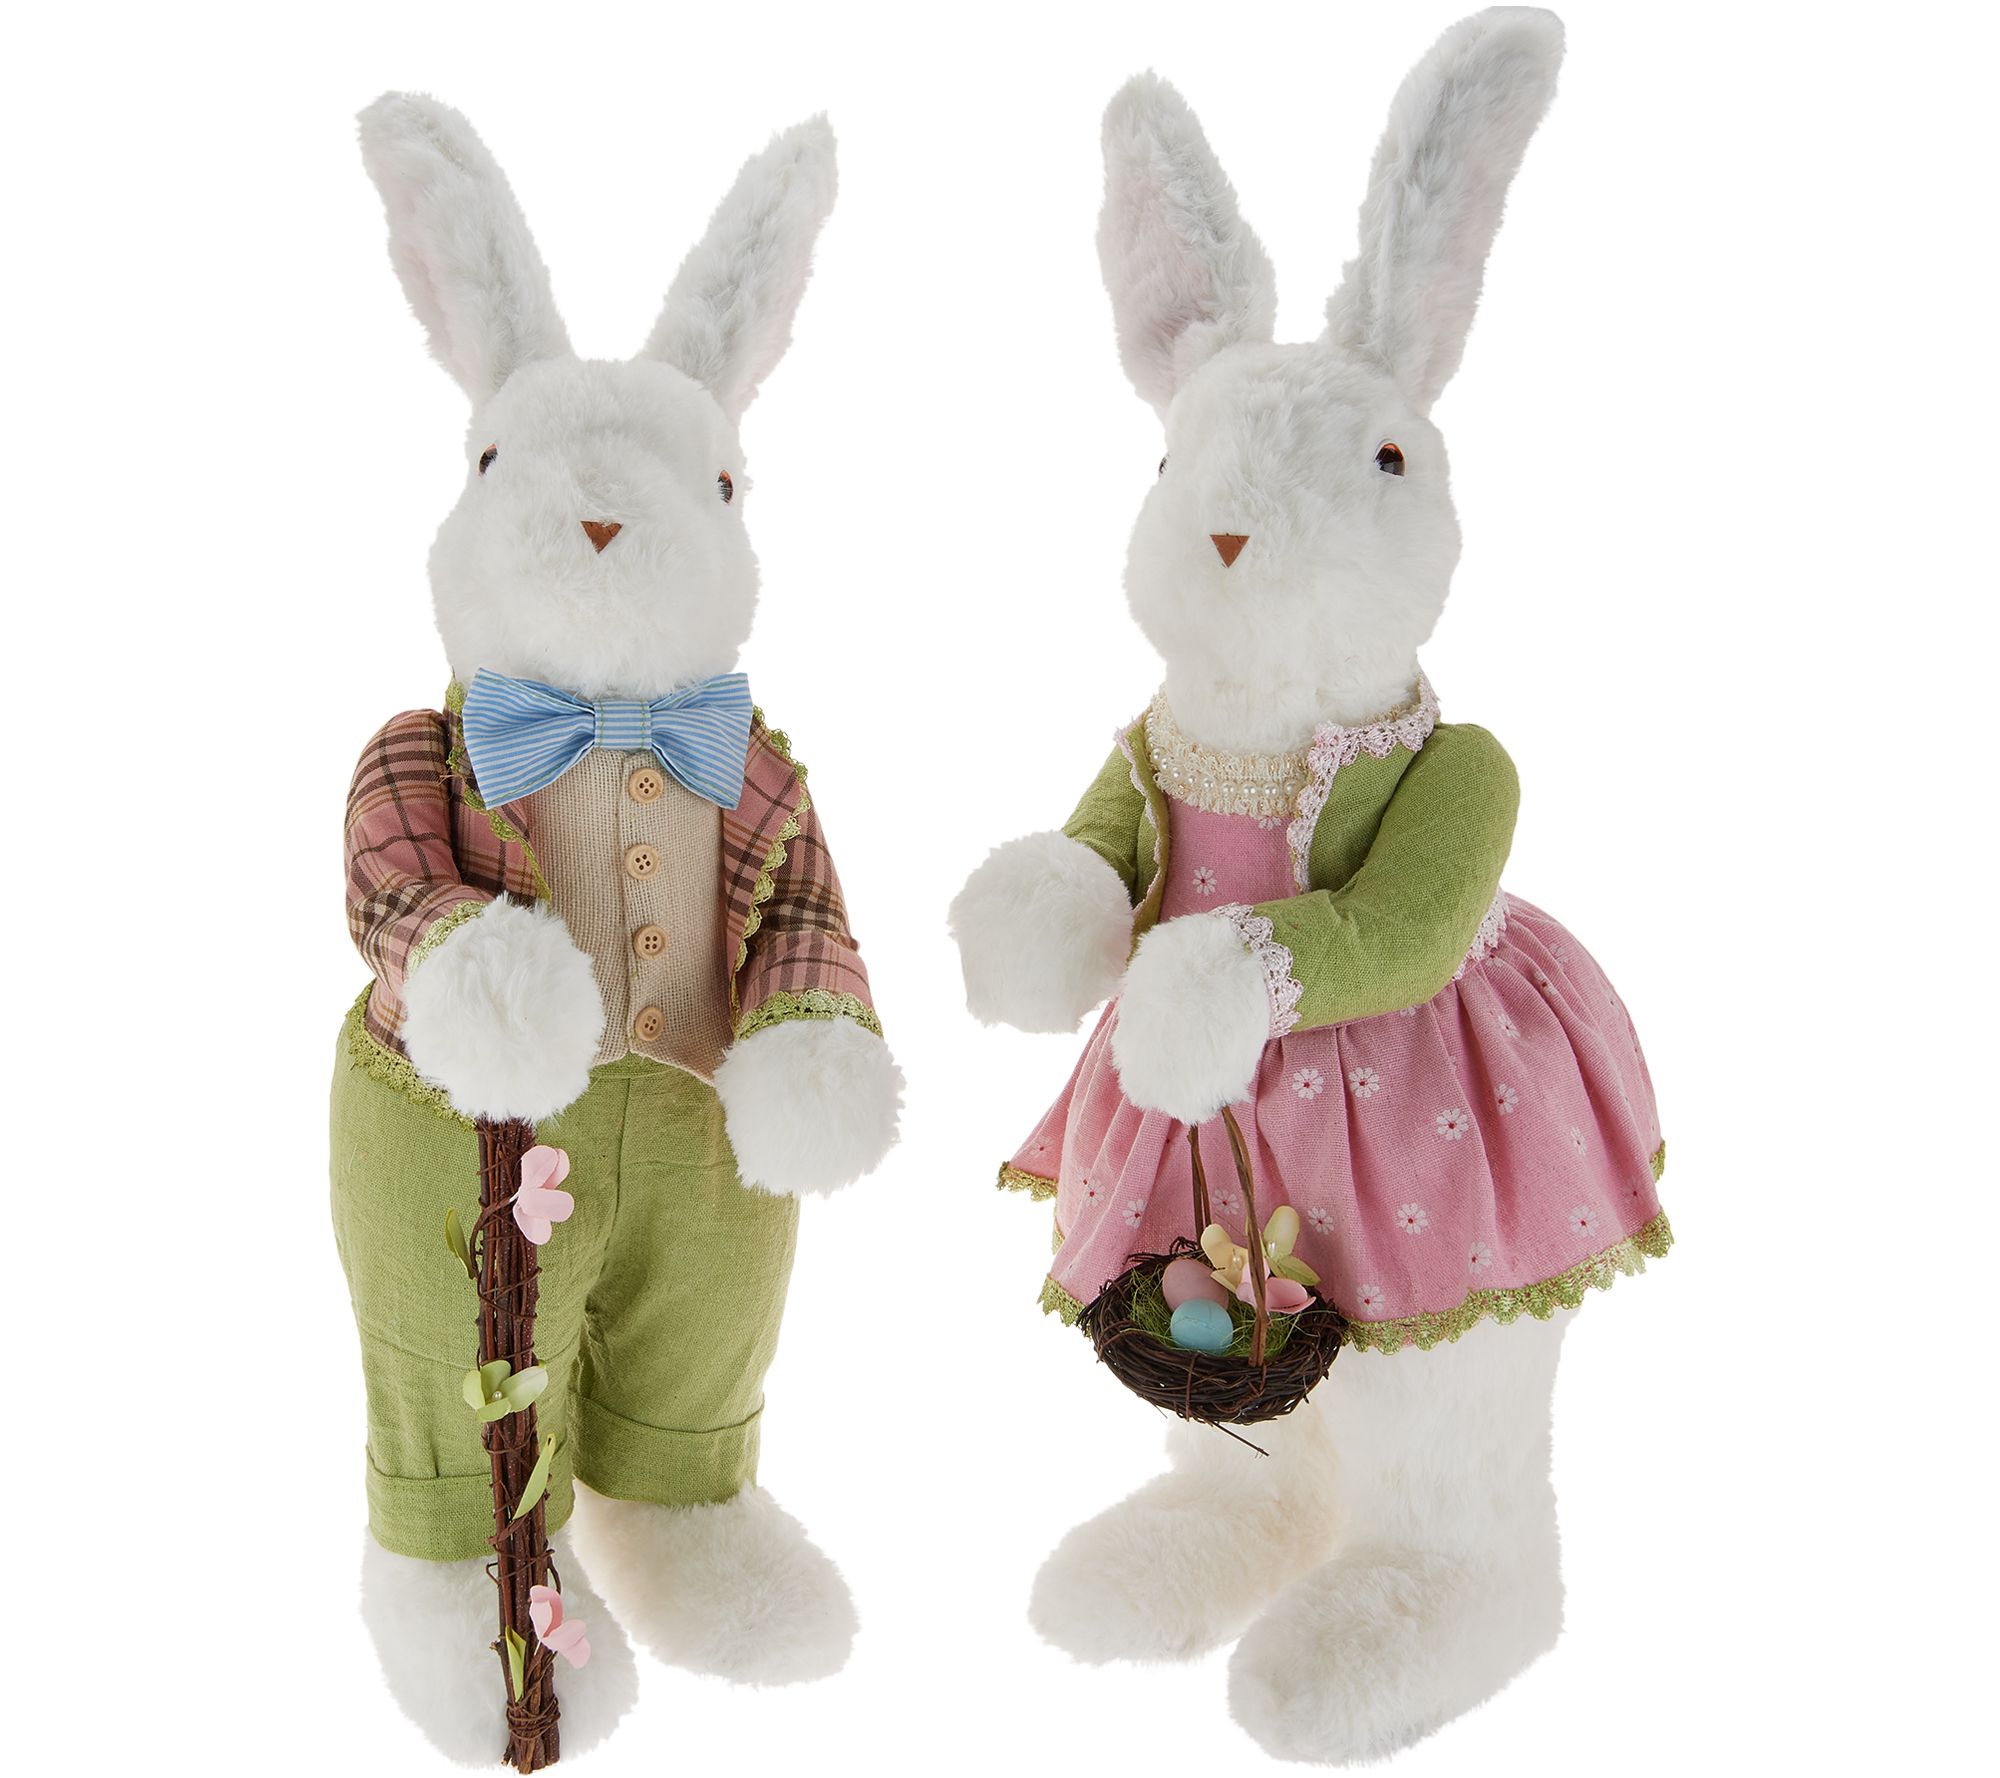 21 Soft White Bunny Couple with Basket & Walking Stick by Valerie 